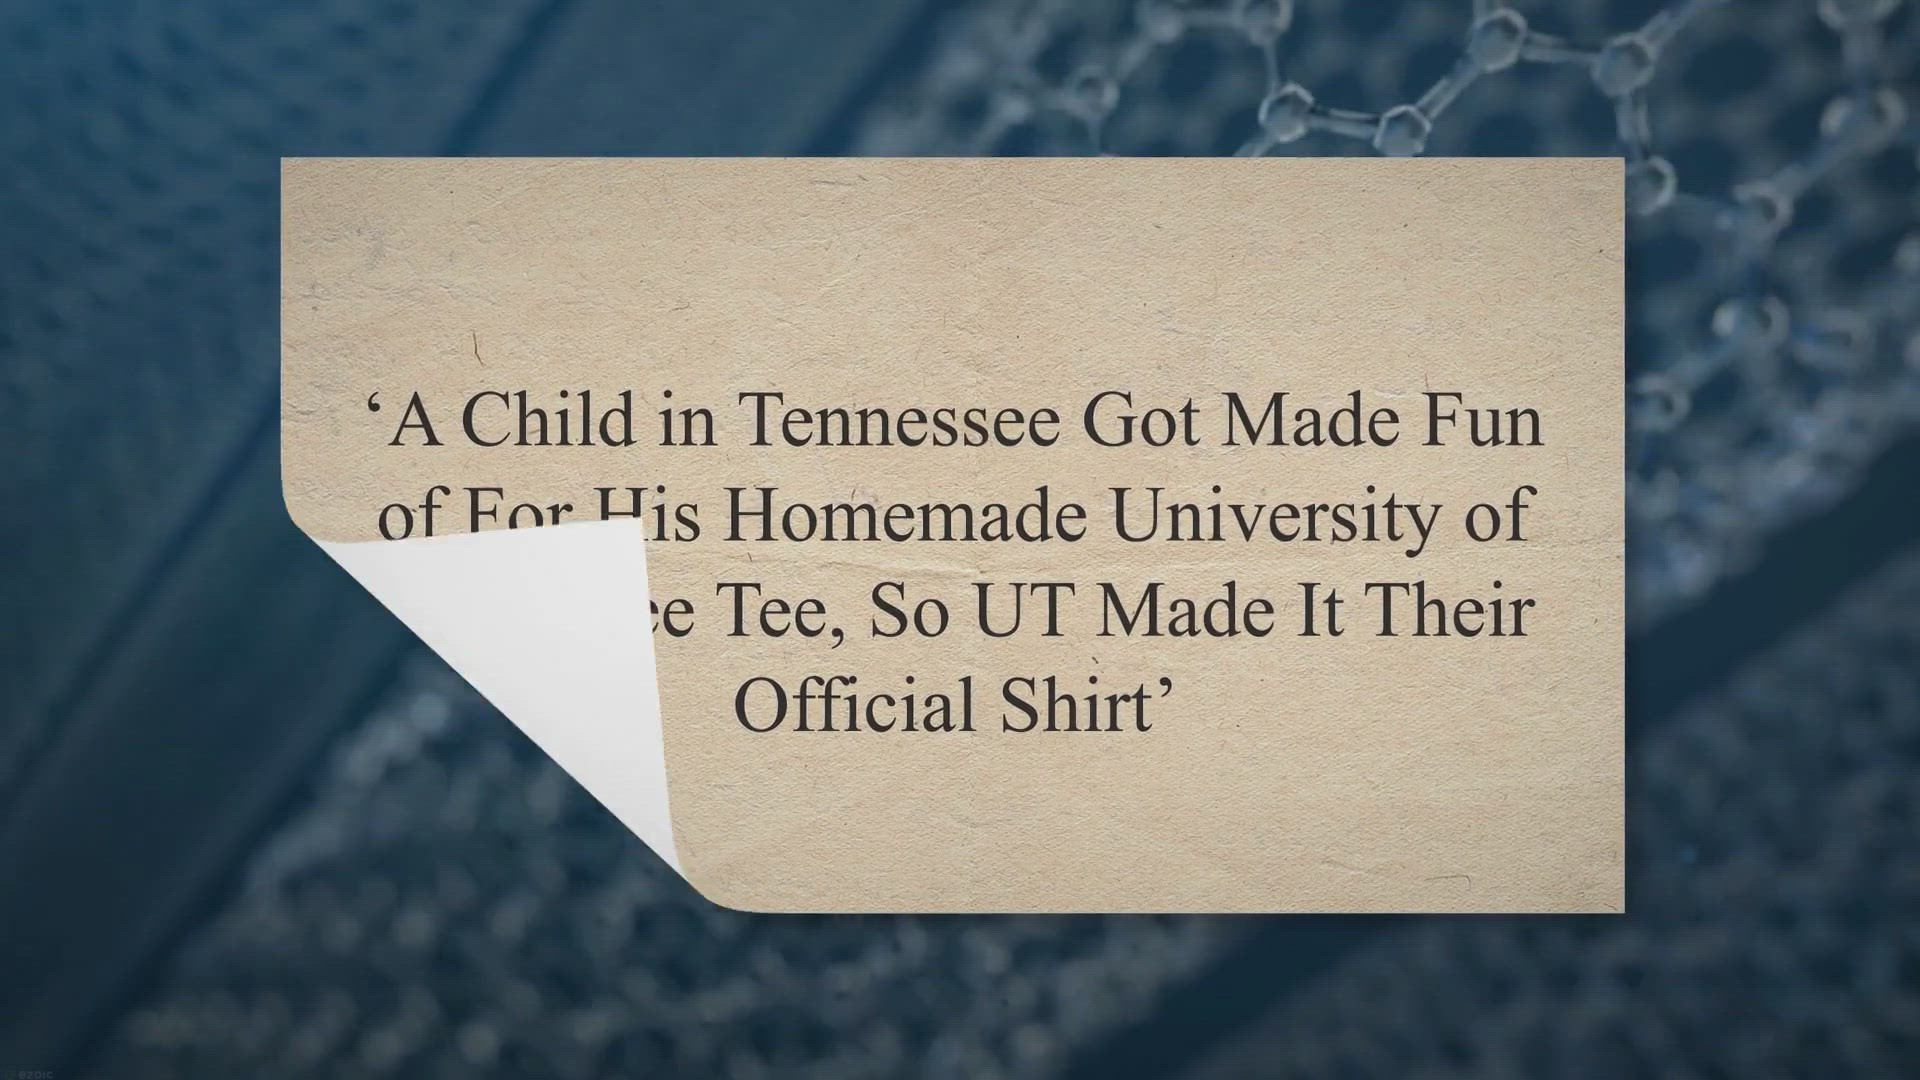 Shirt Designed by Fourth Grader Raises Nearly $1M for STOMP Out Bullying -  News